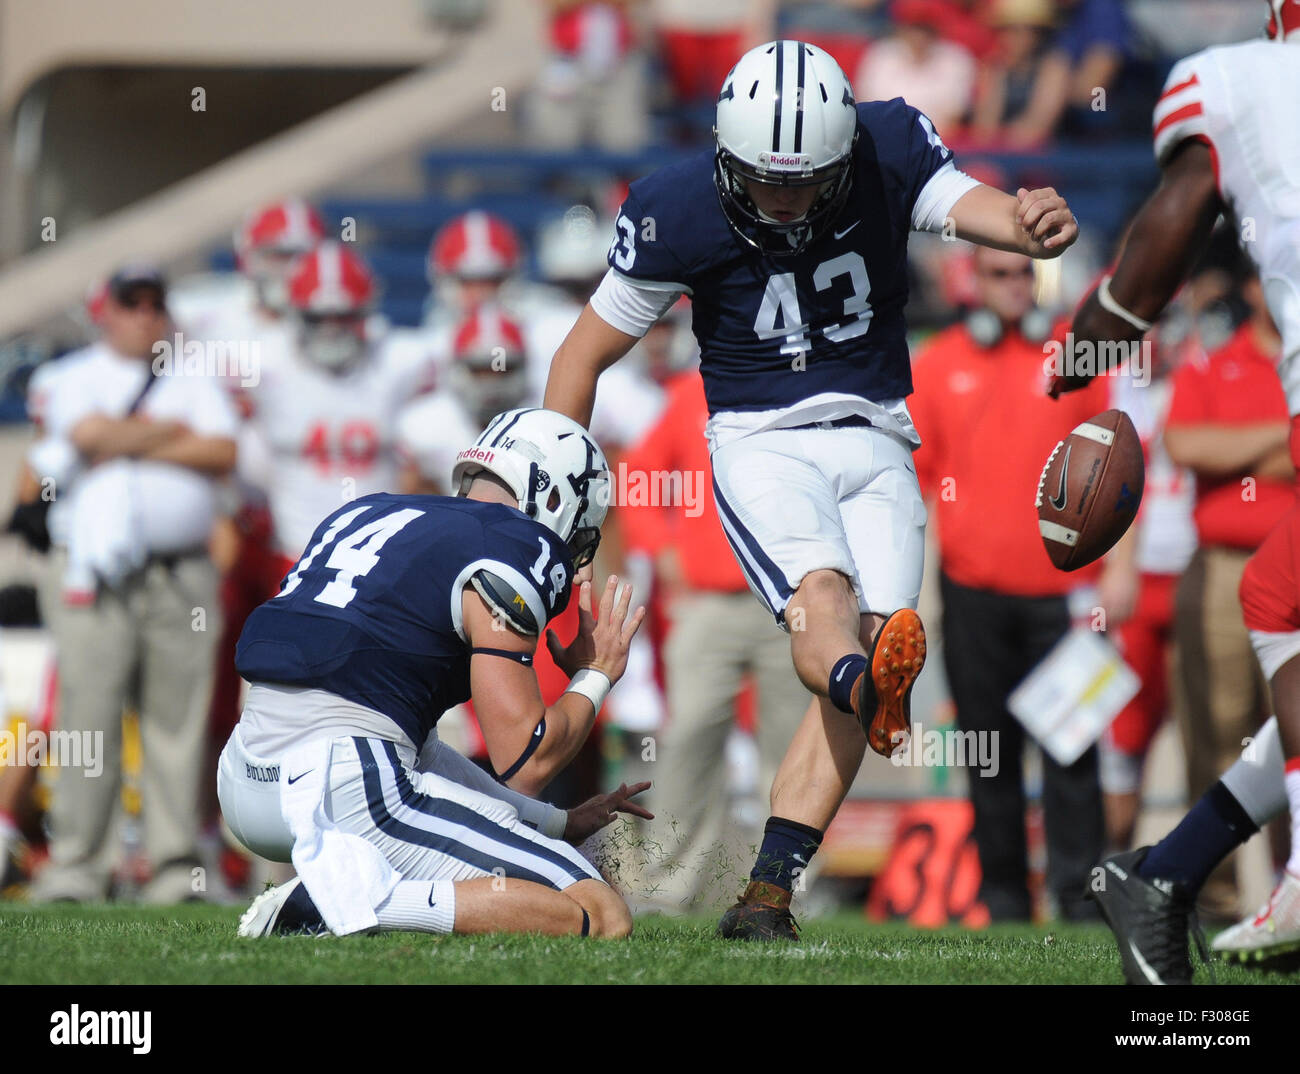 Bryan Holmes (43) in action during a game between the Yale Bulldogs and the Cornell Big Red at the Yale Bowl on September 26, 2015 in New Haven, Connecticut.(Gregory Vasil/Cal Sport Media) Stock Photo